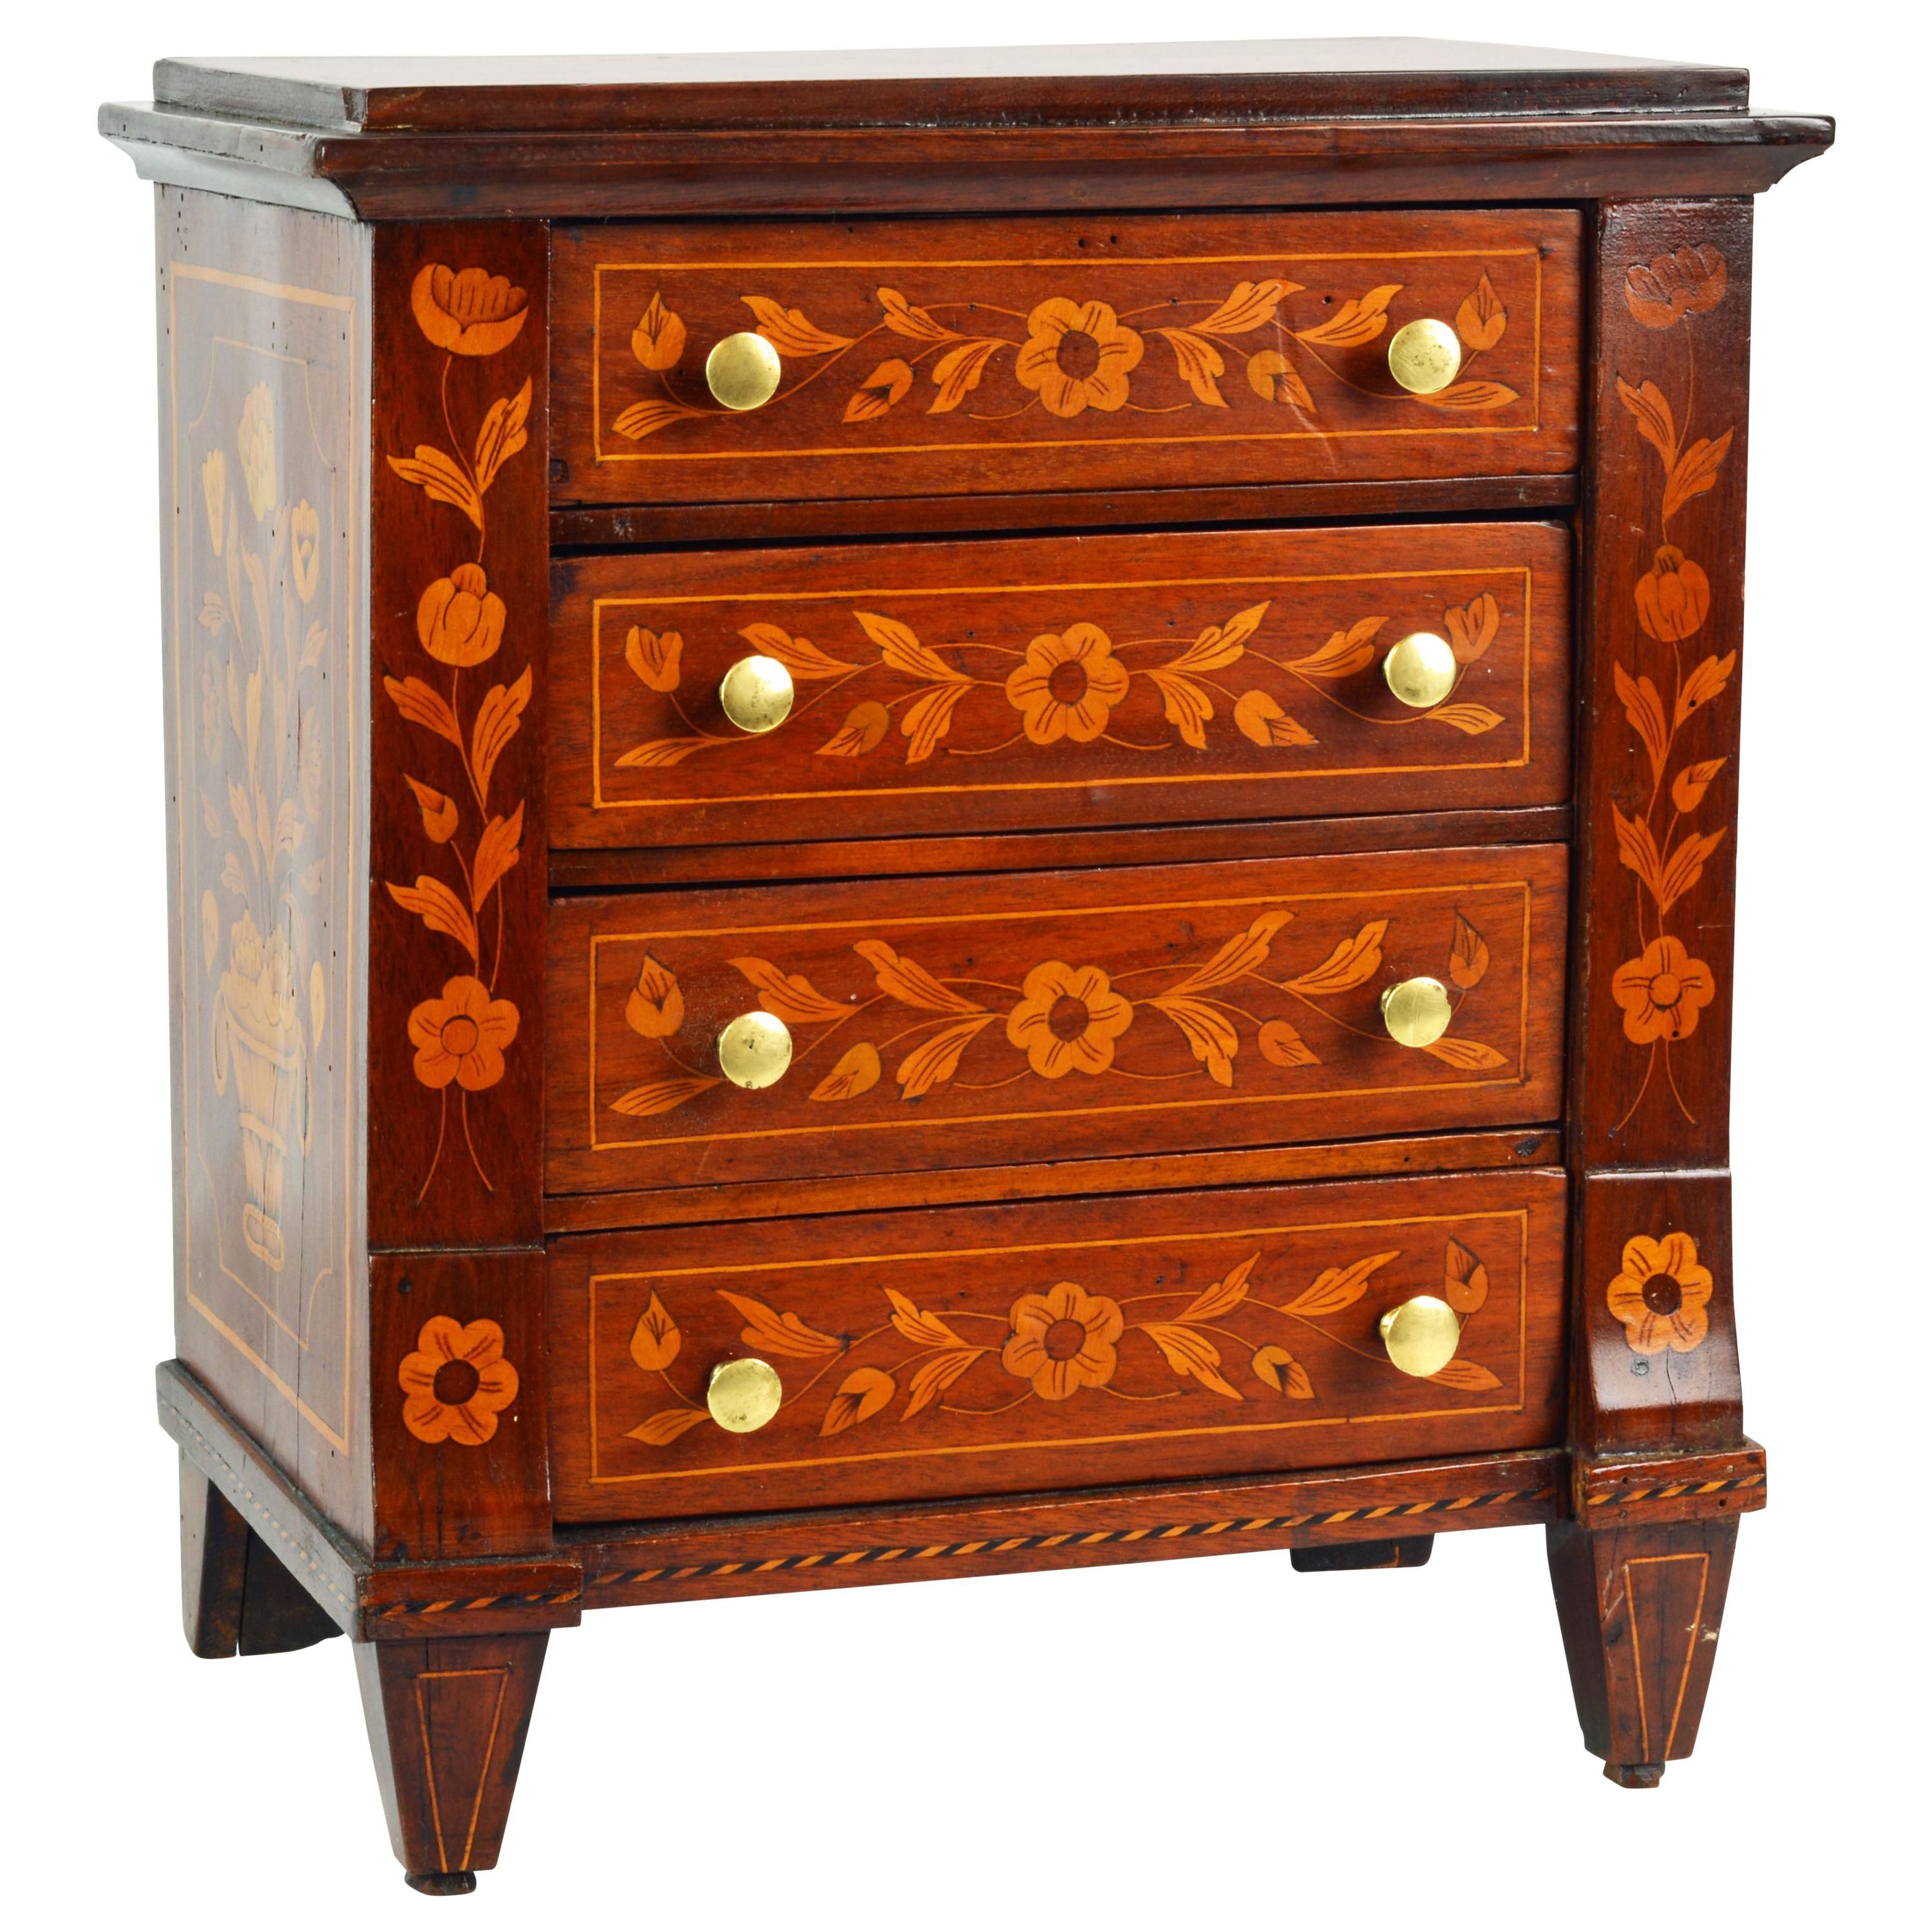 Italian 19th Century Richly Inlaid Miniature Chest of Drawers or Jewelry Chest